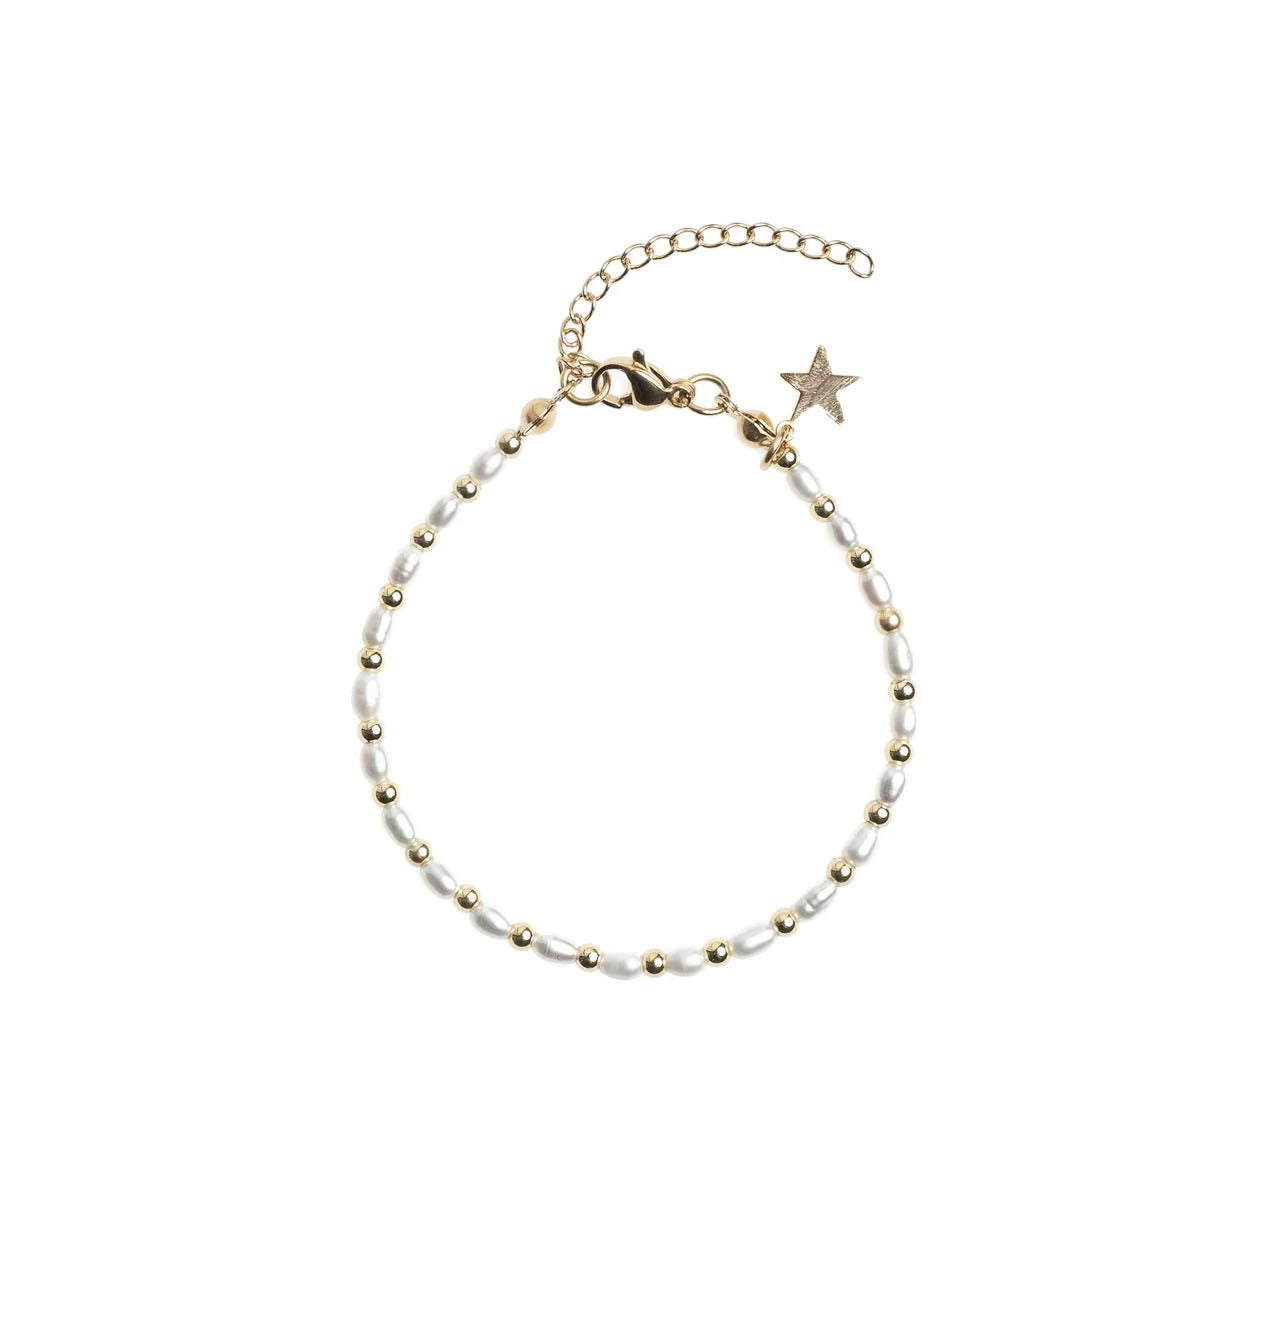 Oval Pearl Bracelet W/Gold Beads White pearl